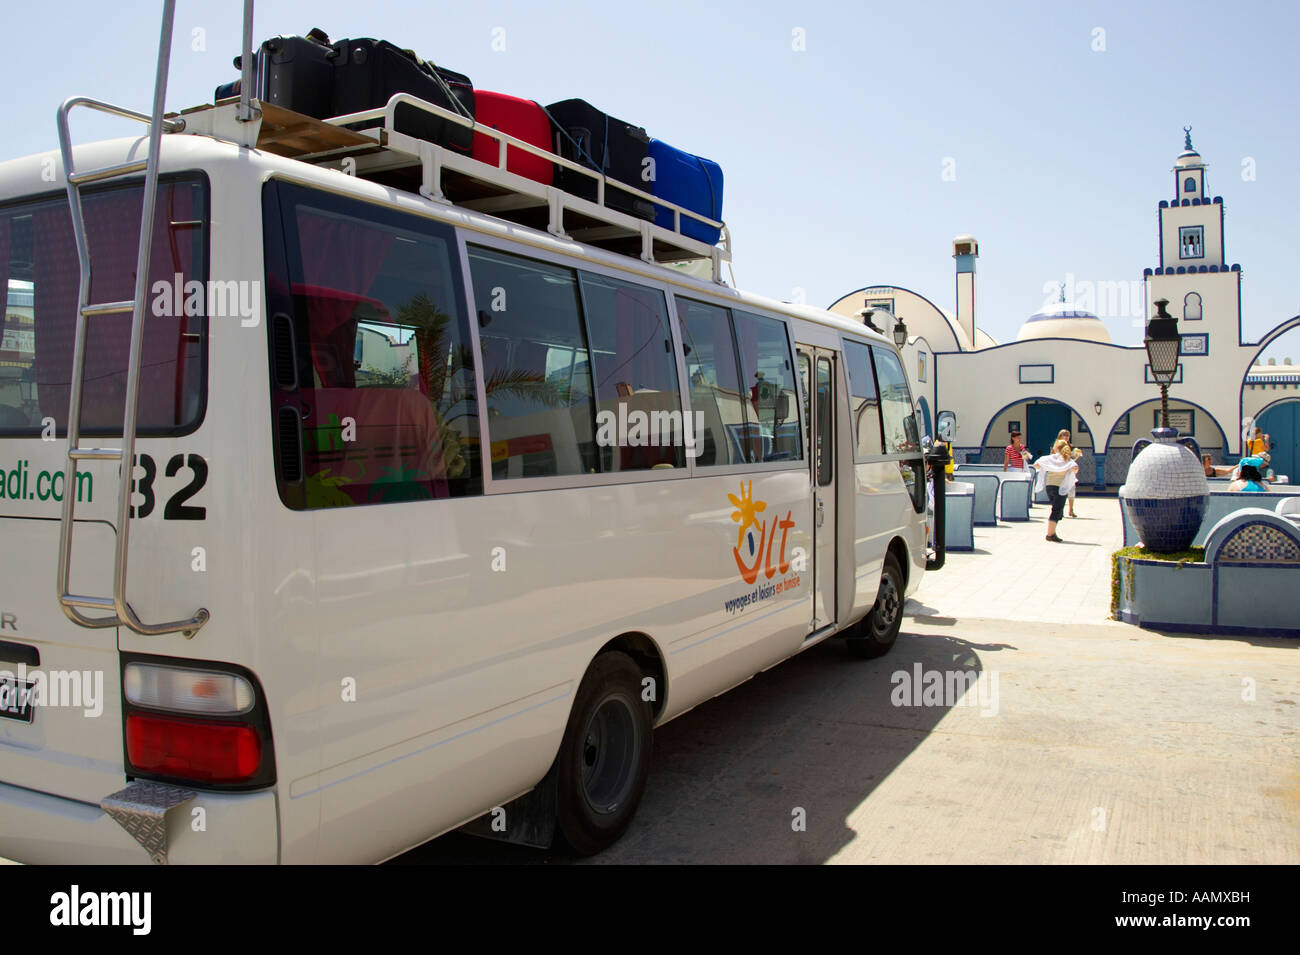 tourist bus with luggage on roof stopped outside a cafe and rest stop by the side of the highway in Tunisia Stock Photo